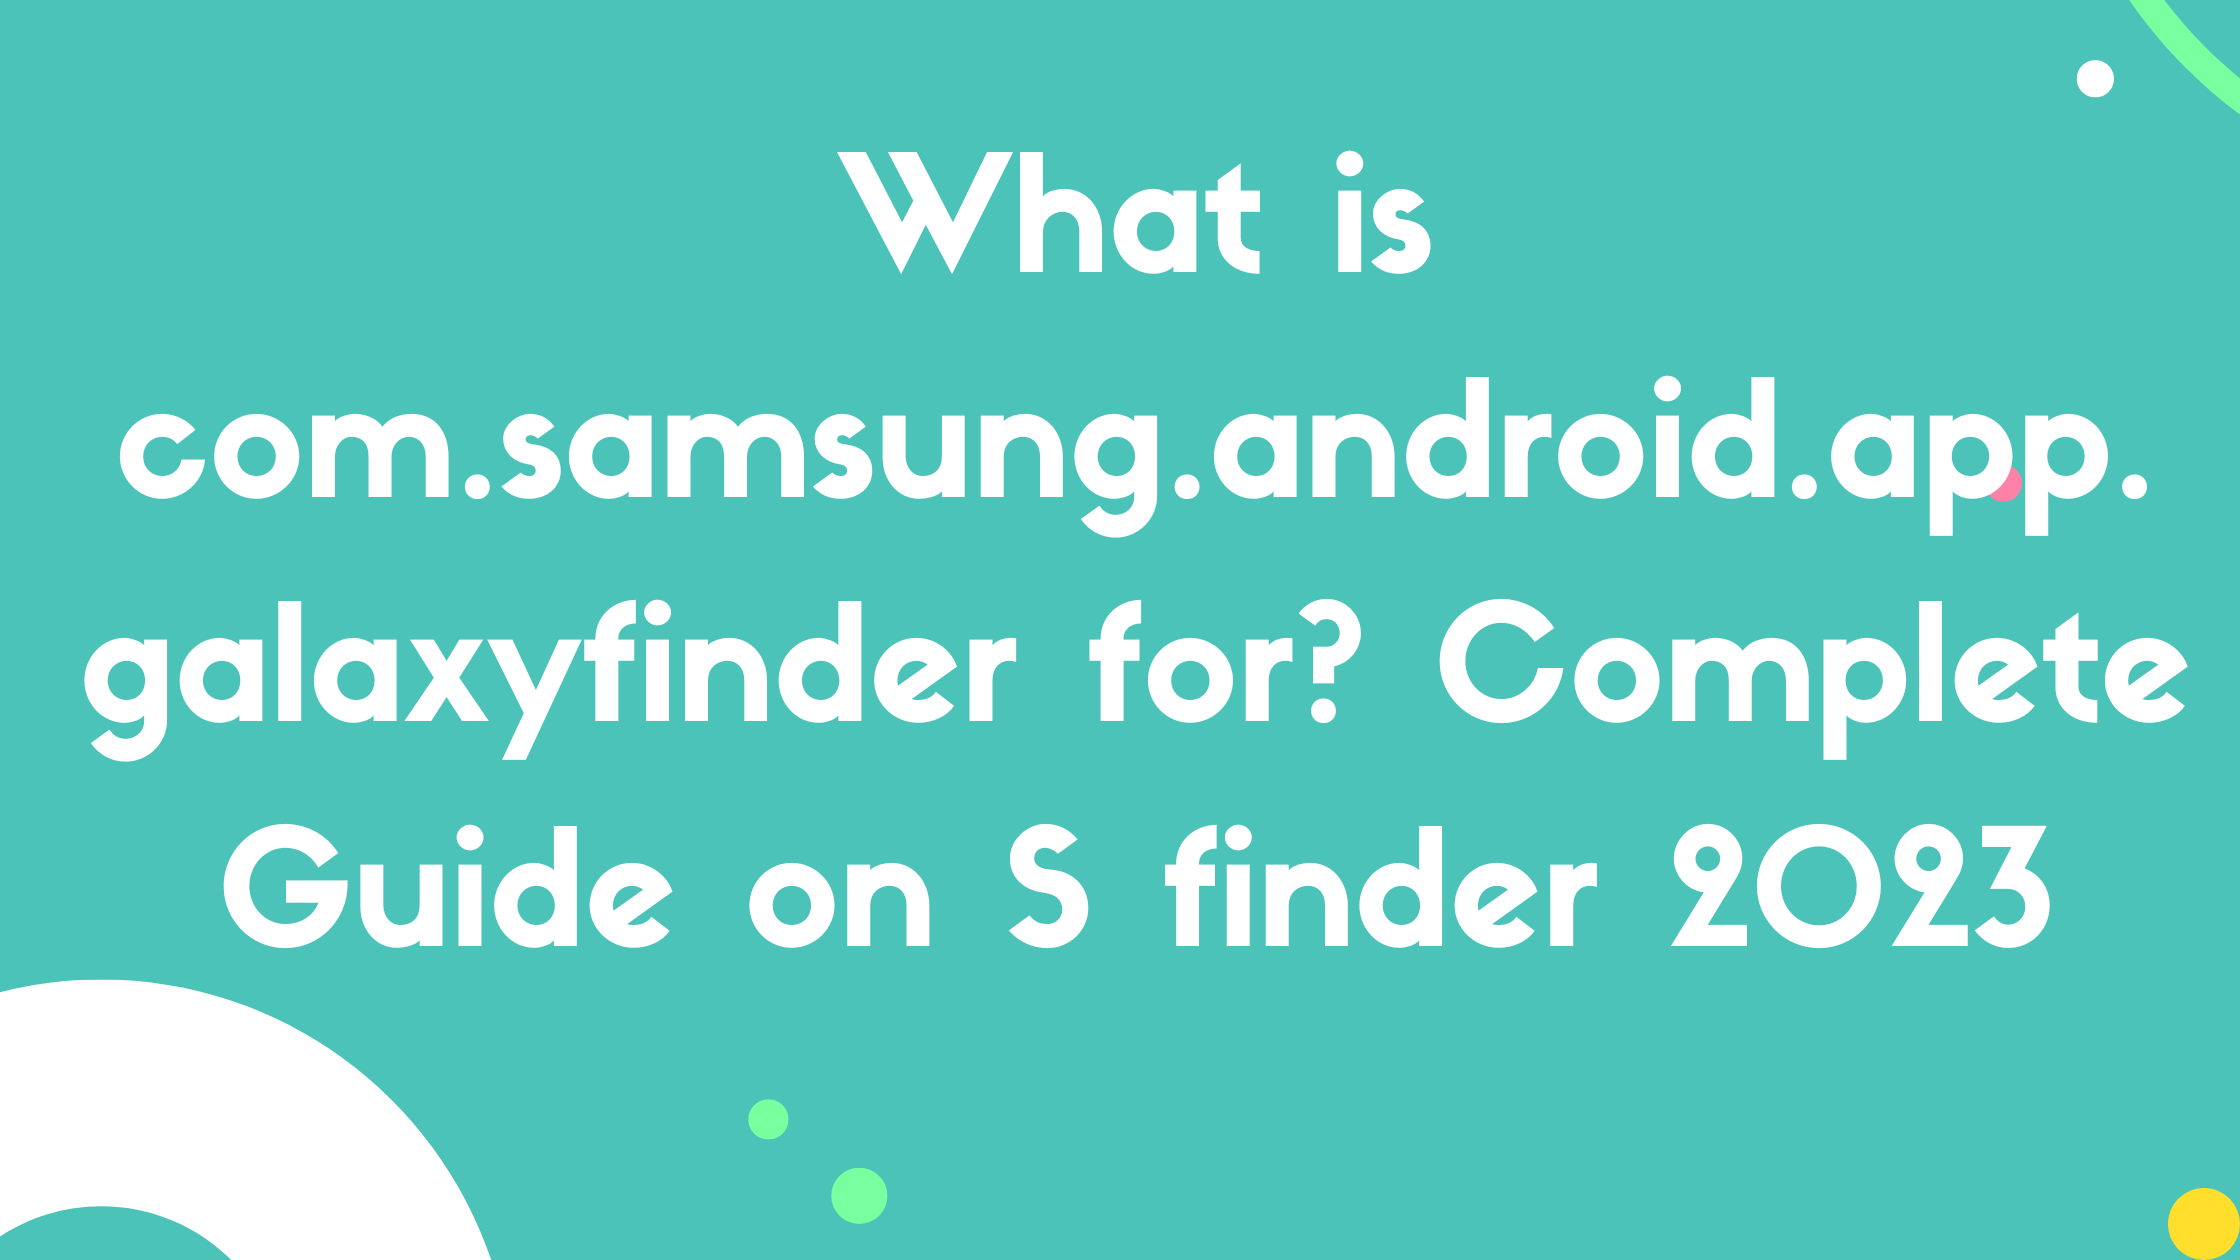 What is com.samsung.android.app.galaxyfinder for?